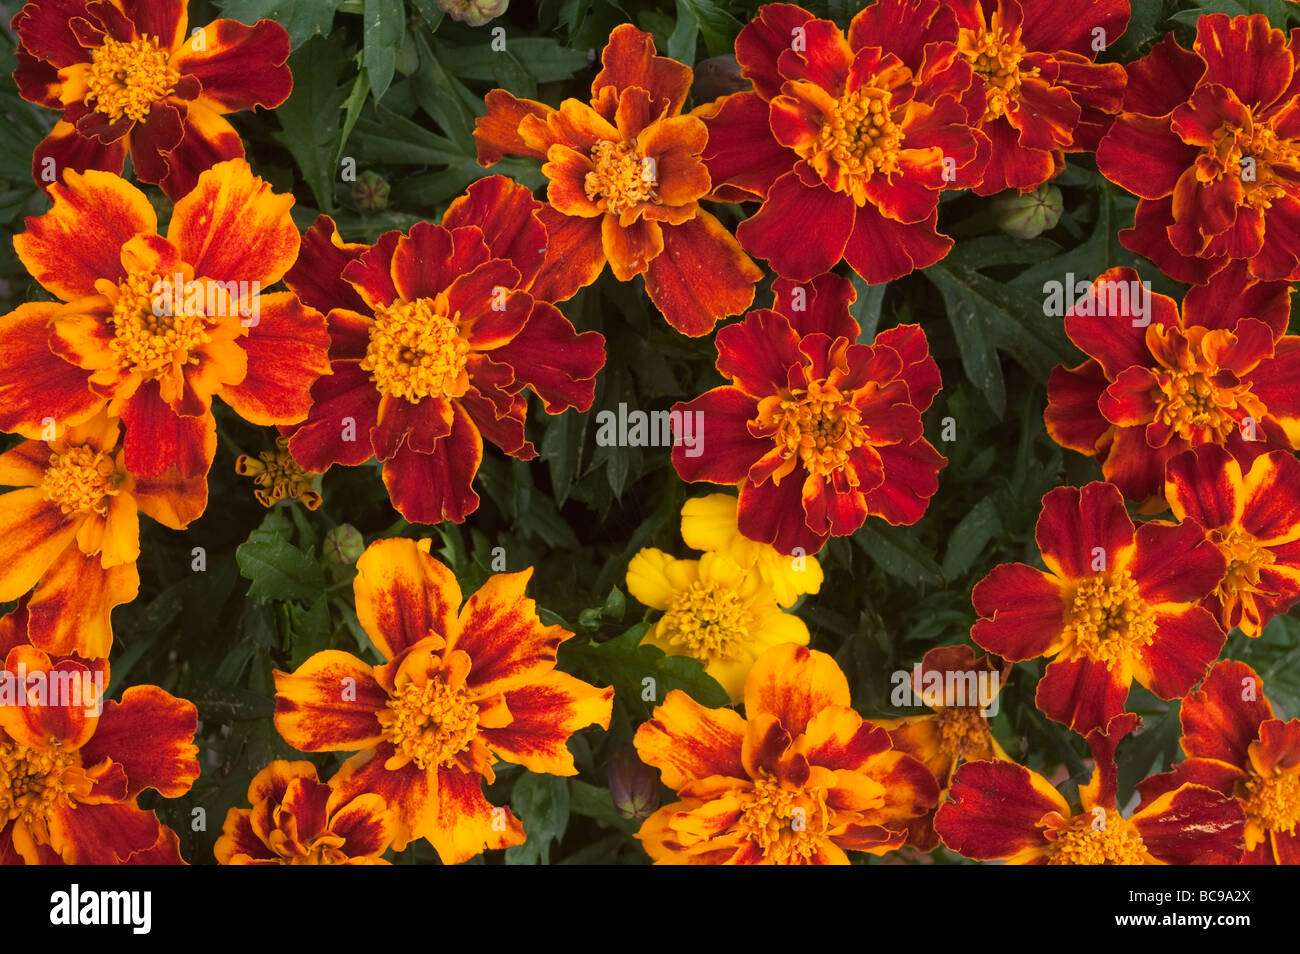 'Close up'of Dwarf 'French Marigolds' flowers Stock Photo